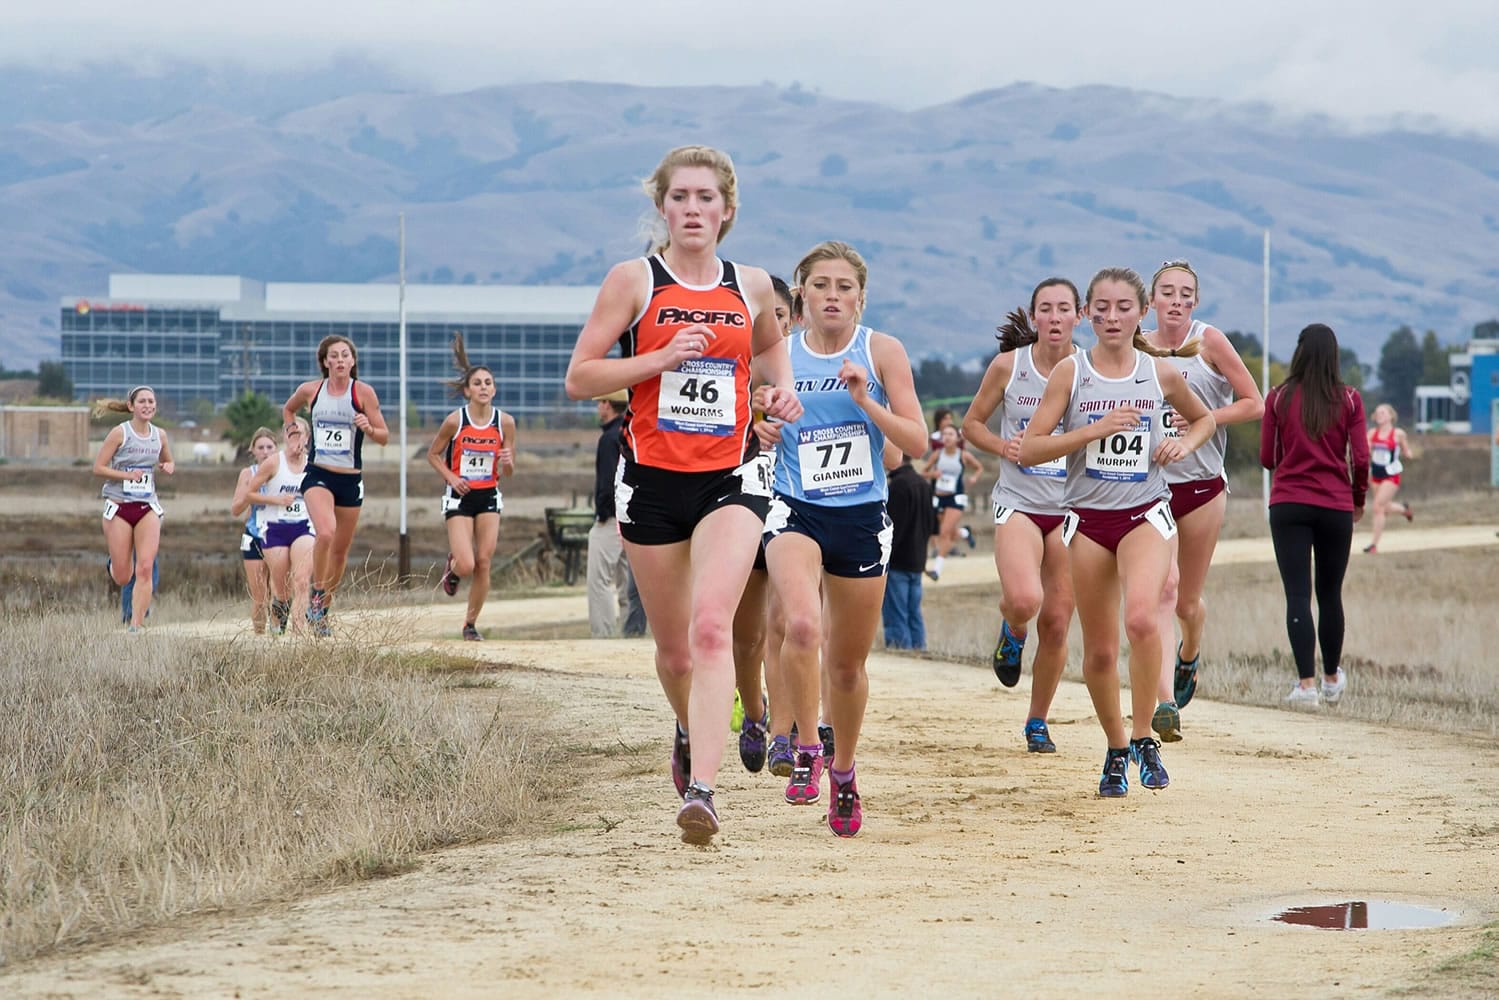 University of the Pacific's Lindsay Wourms (46) set a school record at the West Coast Conference meet.